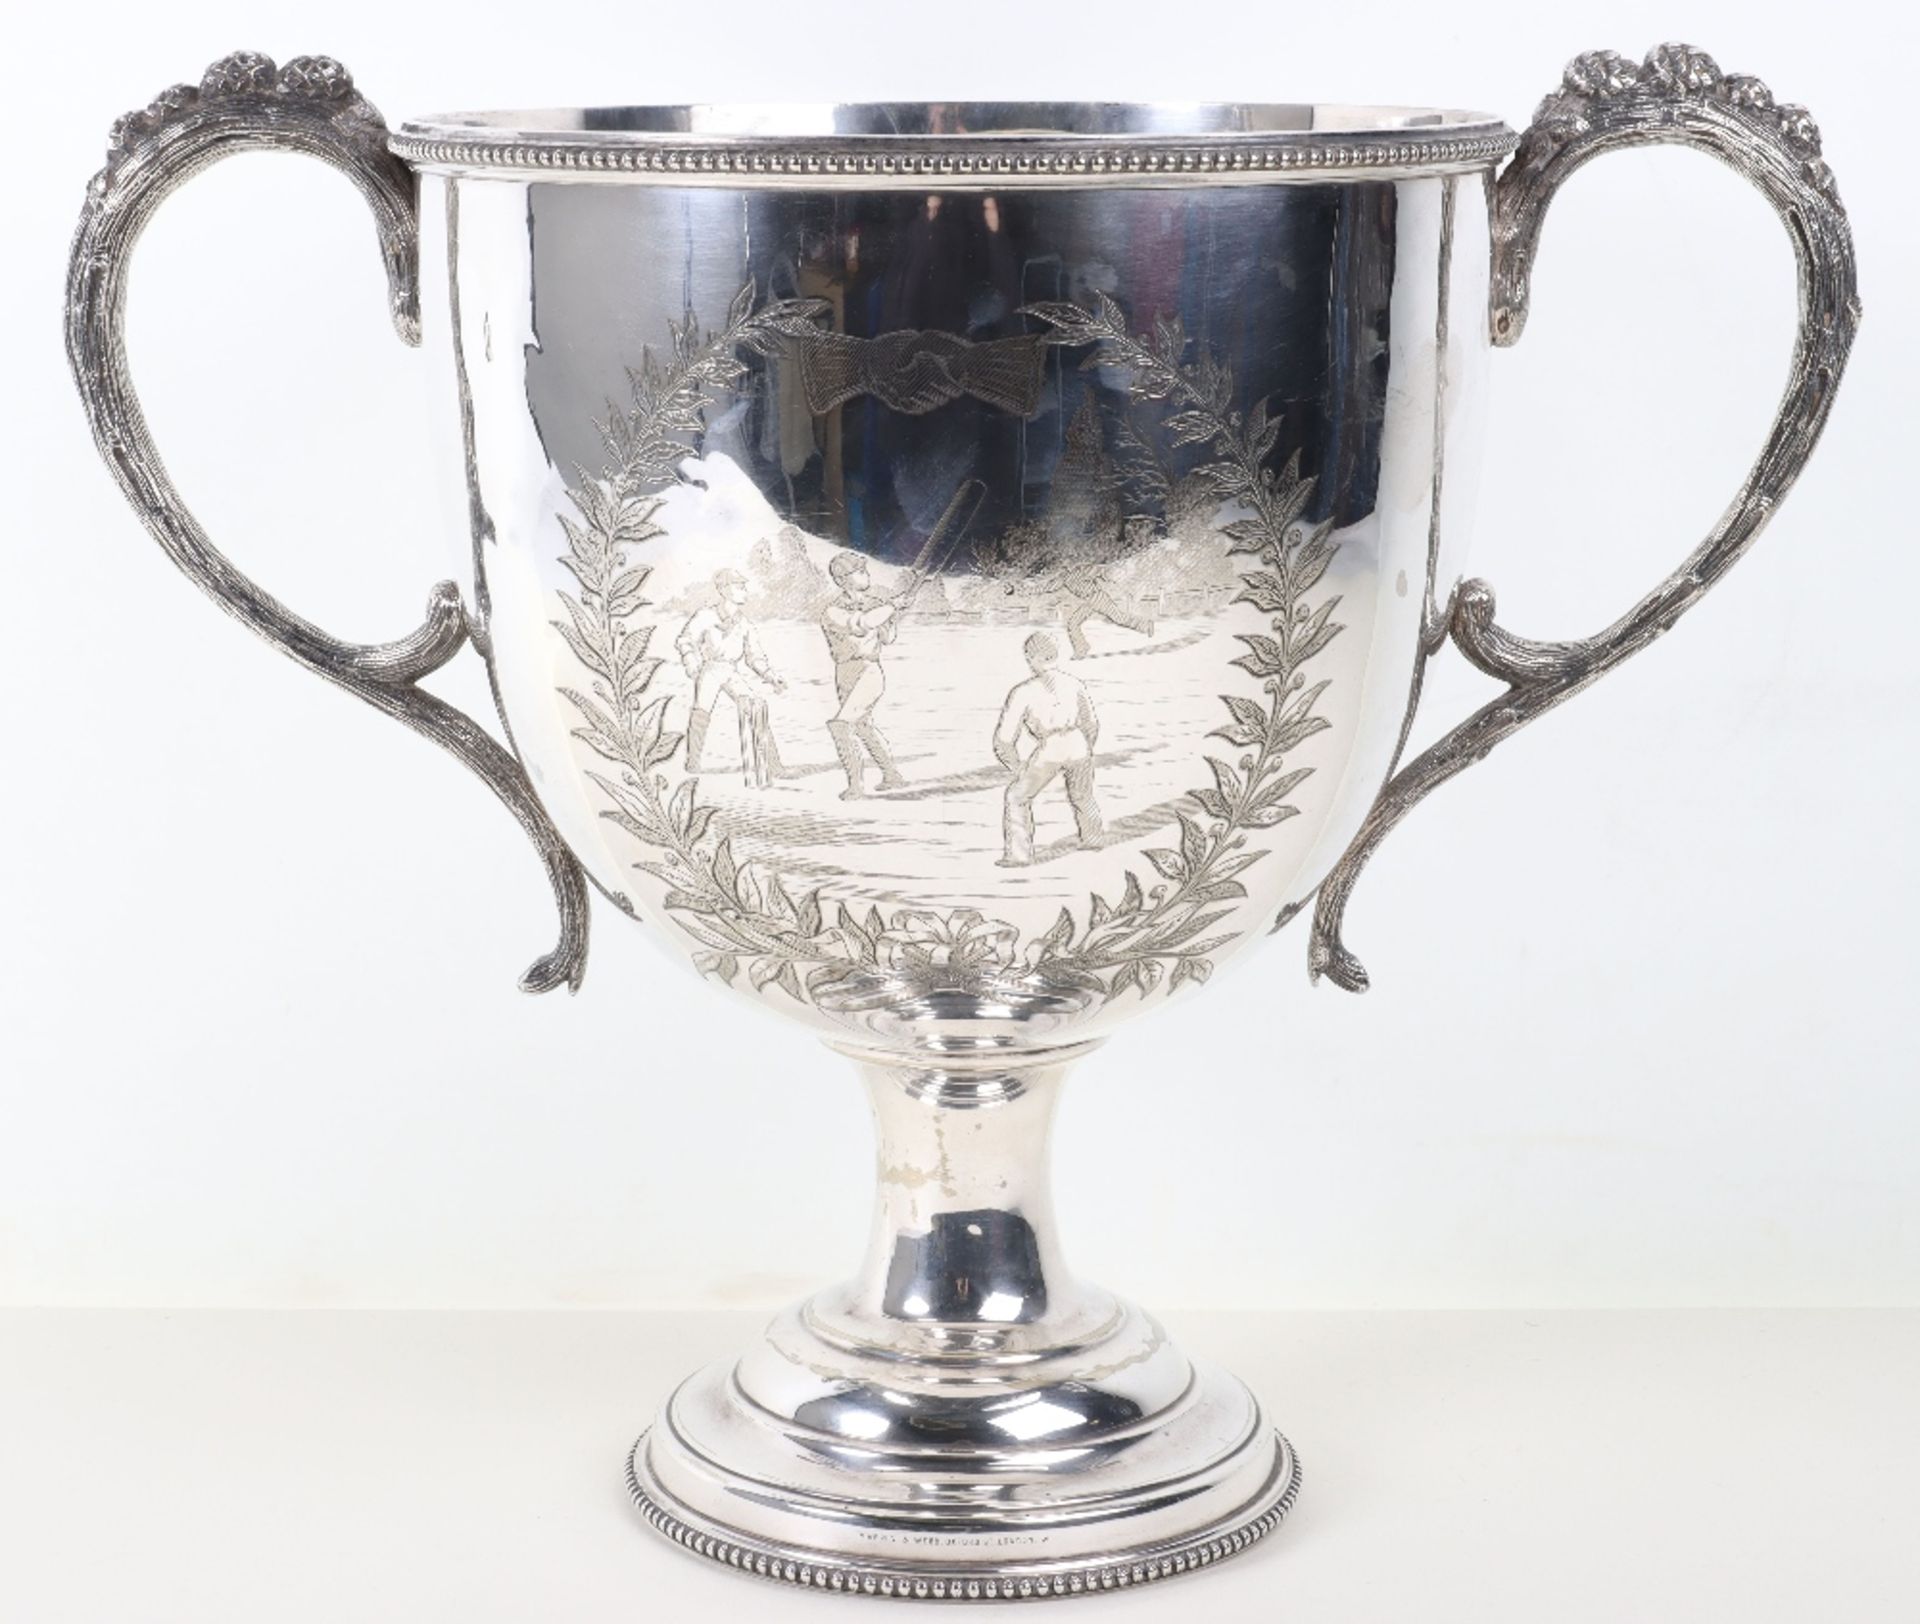 An interesting and substantial 19th century silver plated cricket trophy for the Challenge Cup 1885